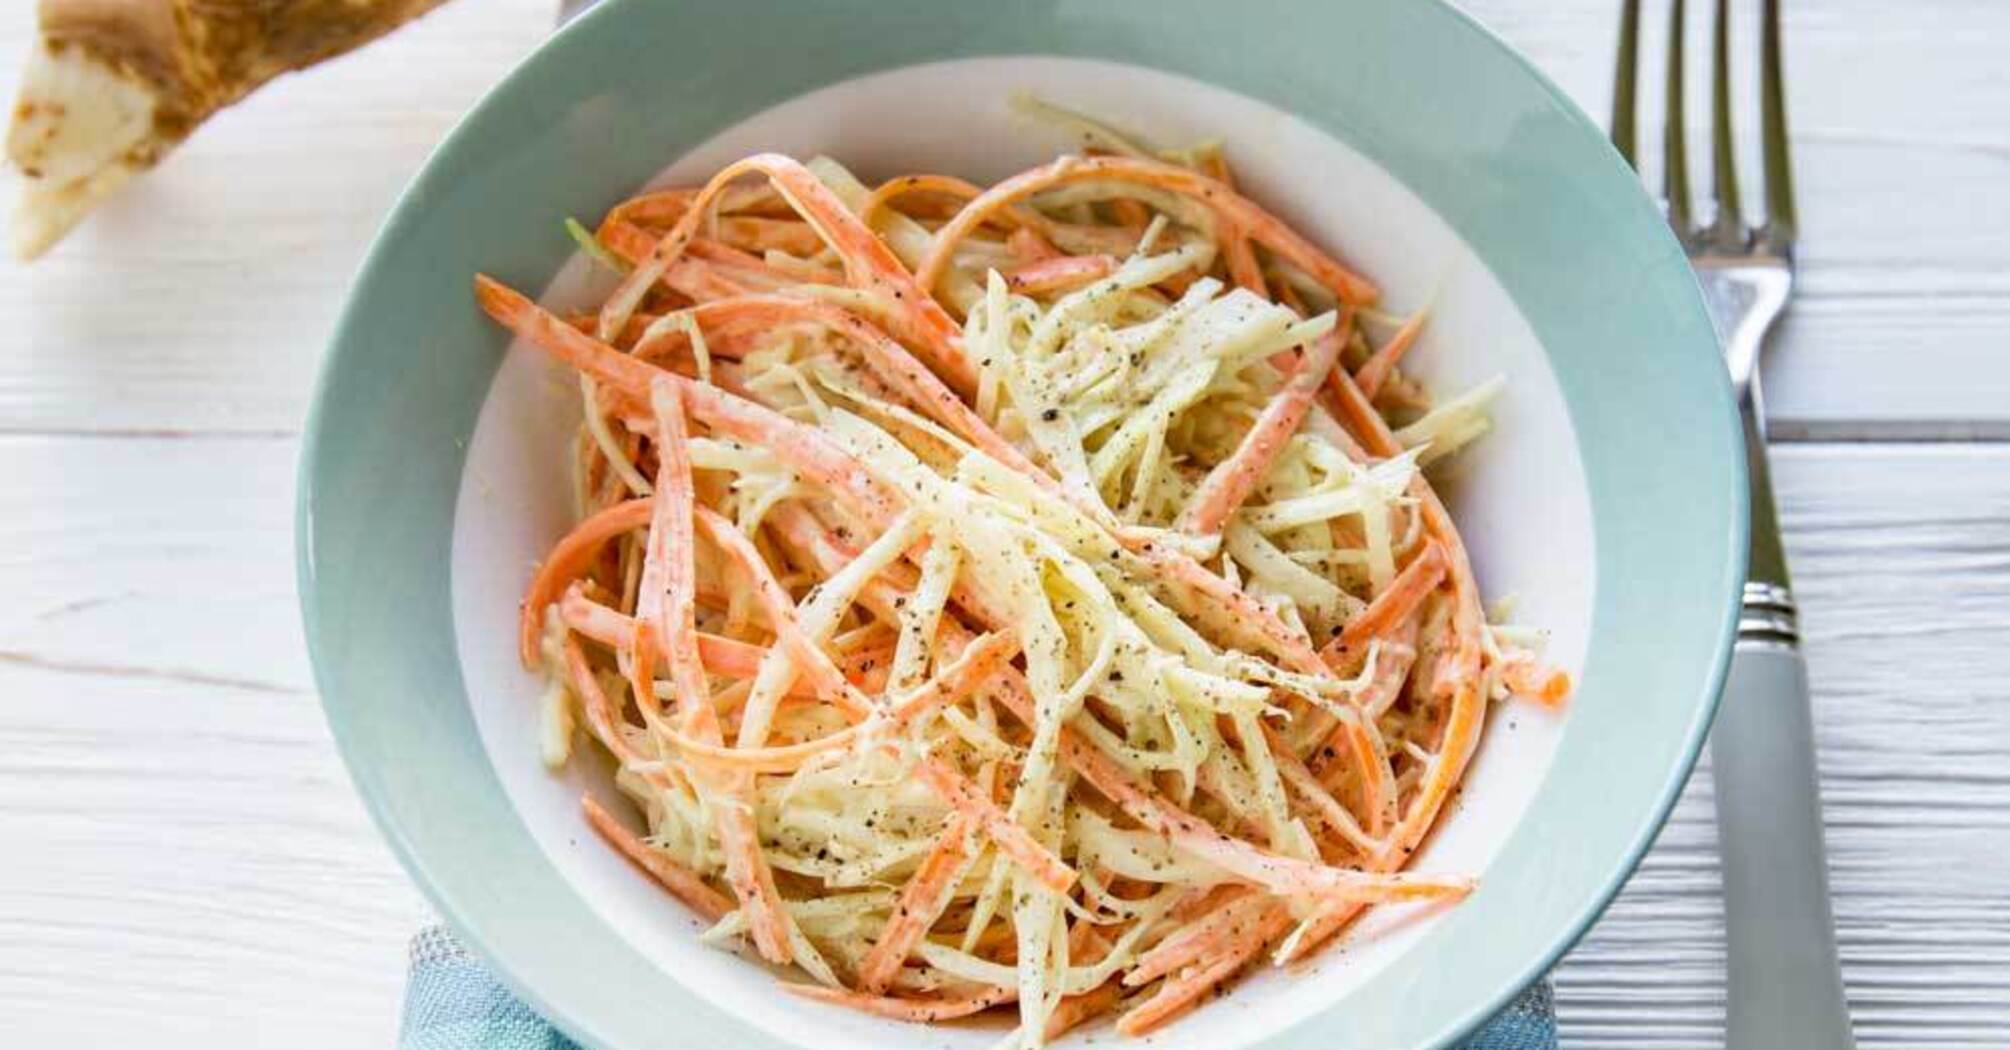 Delicious cabbage and carrot salad